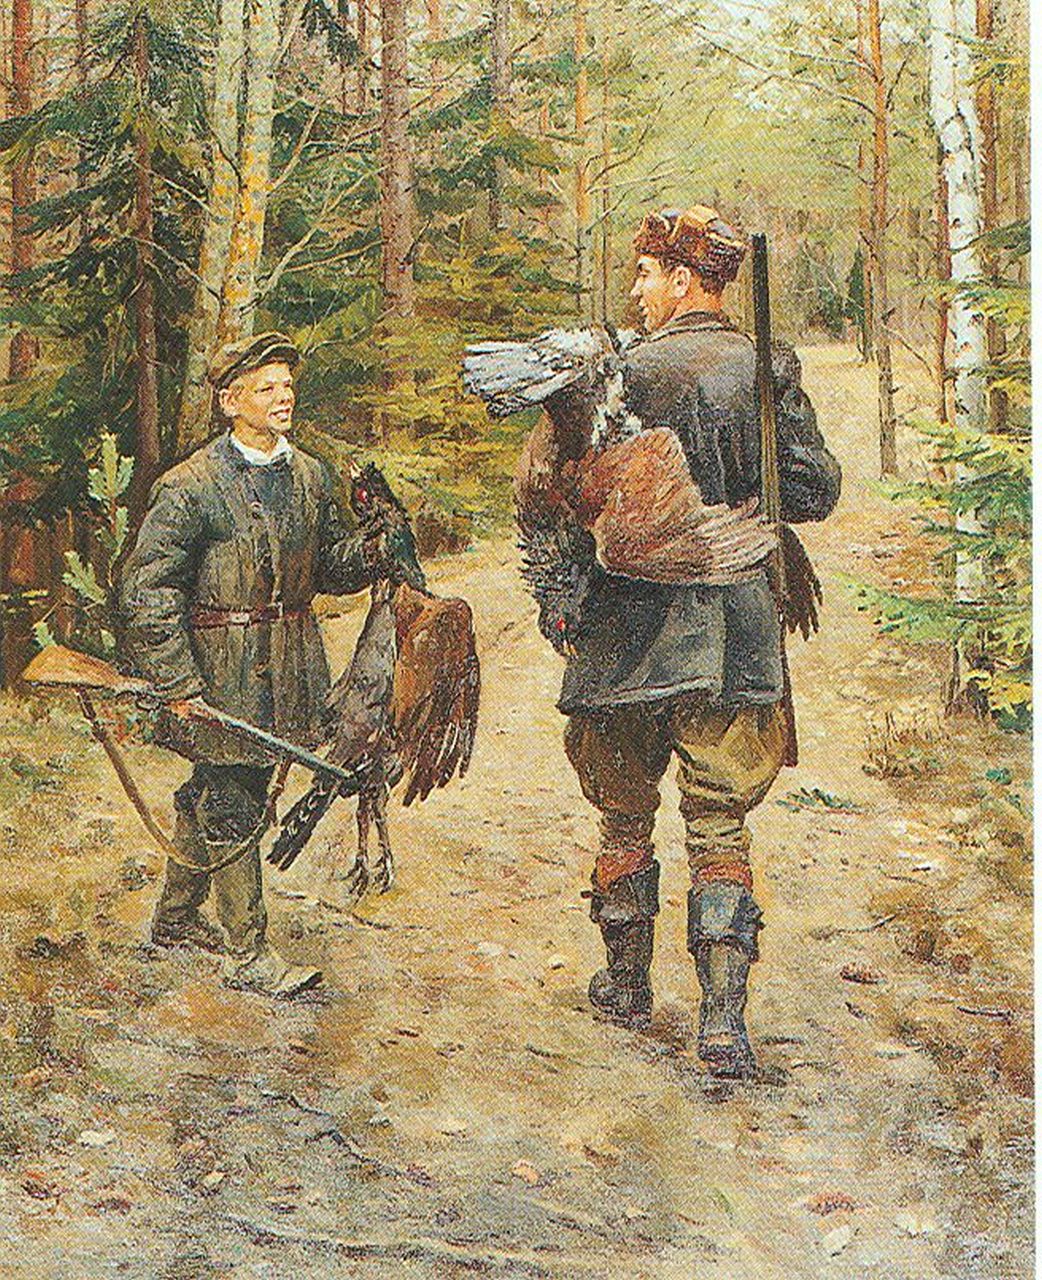 Nikolay Aleksandrovitch Sysoev | Hunters in a forest, Öl auf Leinwand, 124,0 x 100,0 cm, signed on the reverse und dated 1955